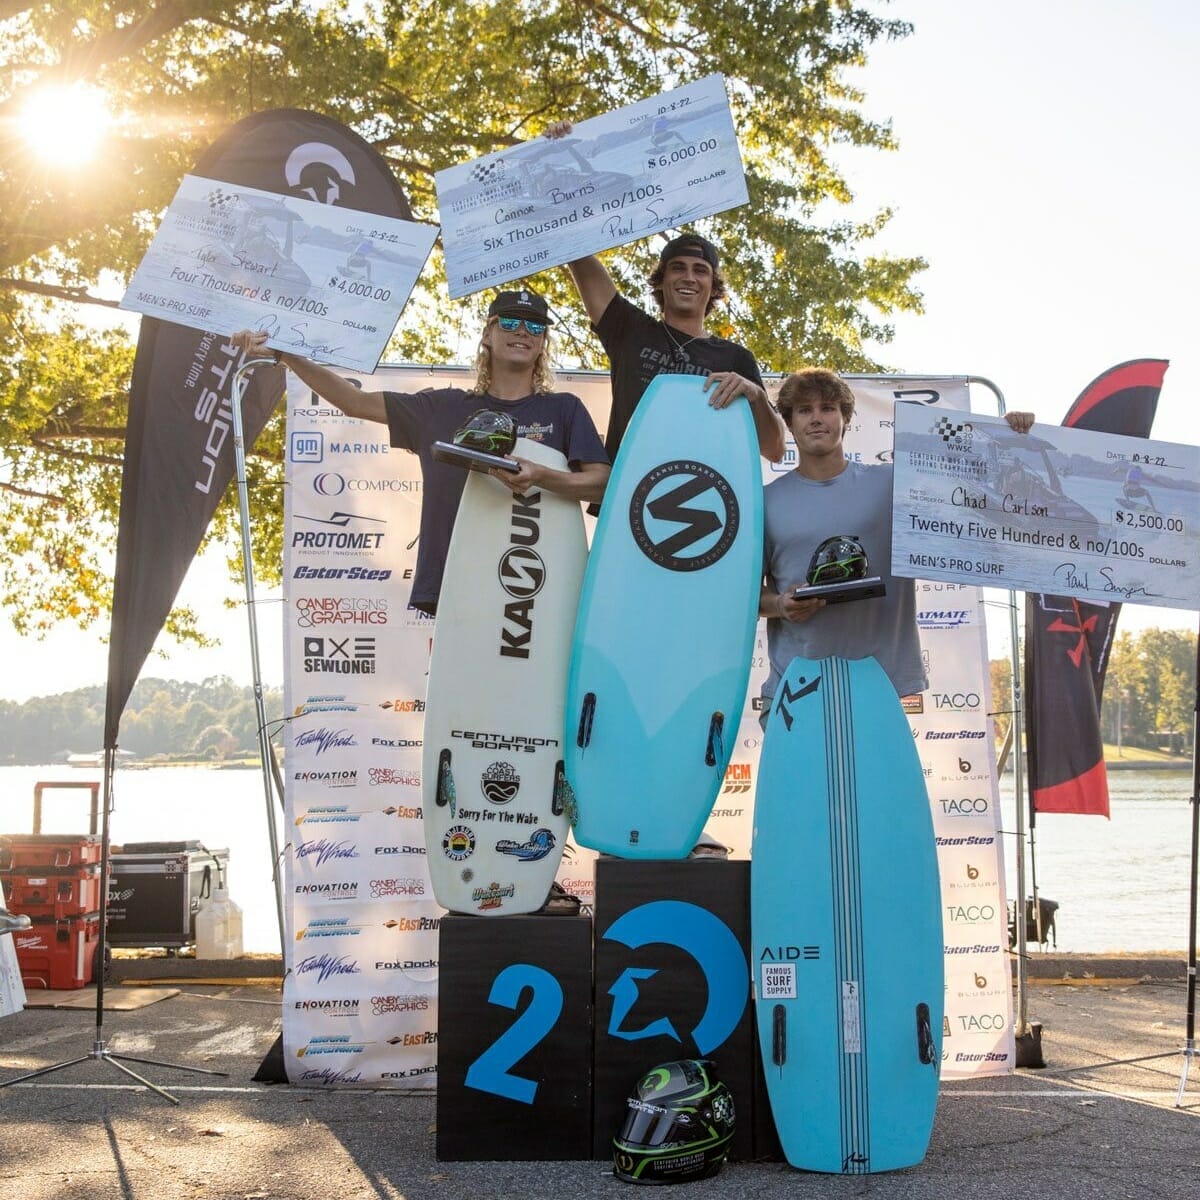 A group of people on top of a podium, holding surfboards.